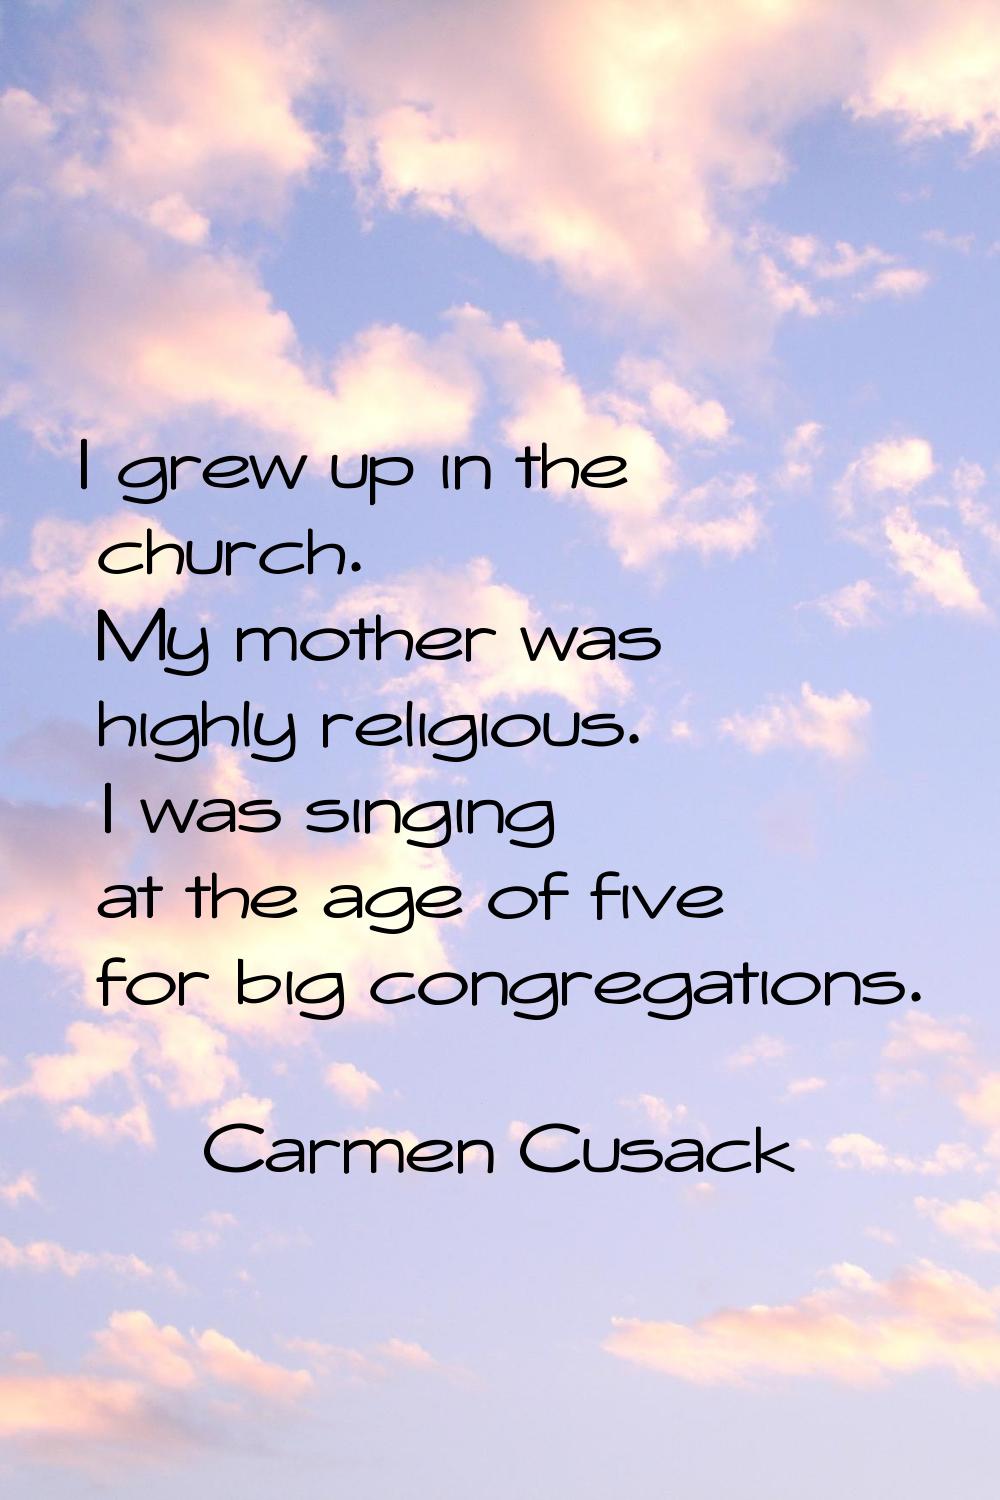 I grew up in the church. My mother was highly religious. I was singing at the age of five for big c